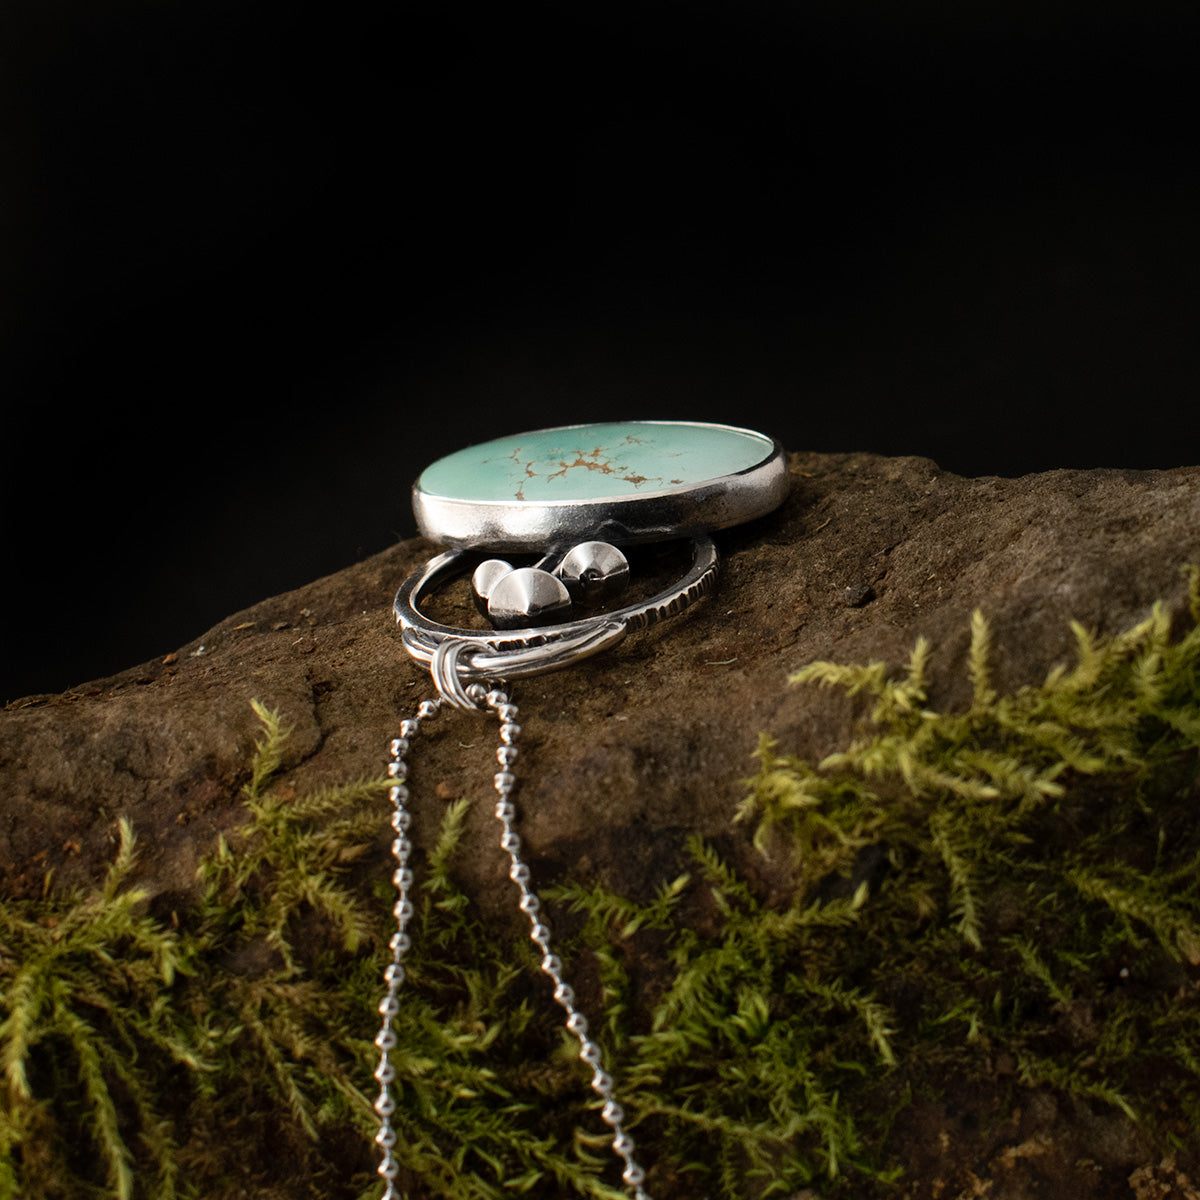 The top side of the Turquoise Fungal Loop Pendant while it lies down, showing its smooth mushroom caps and sterling silver loop, textured by hand like tree bark.